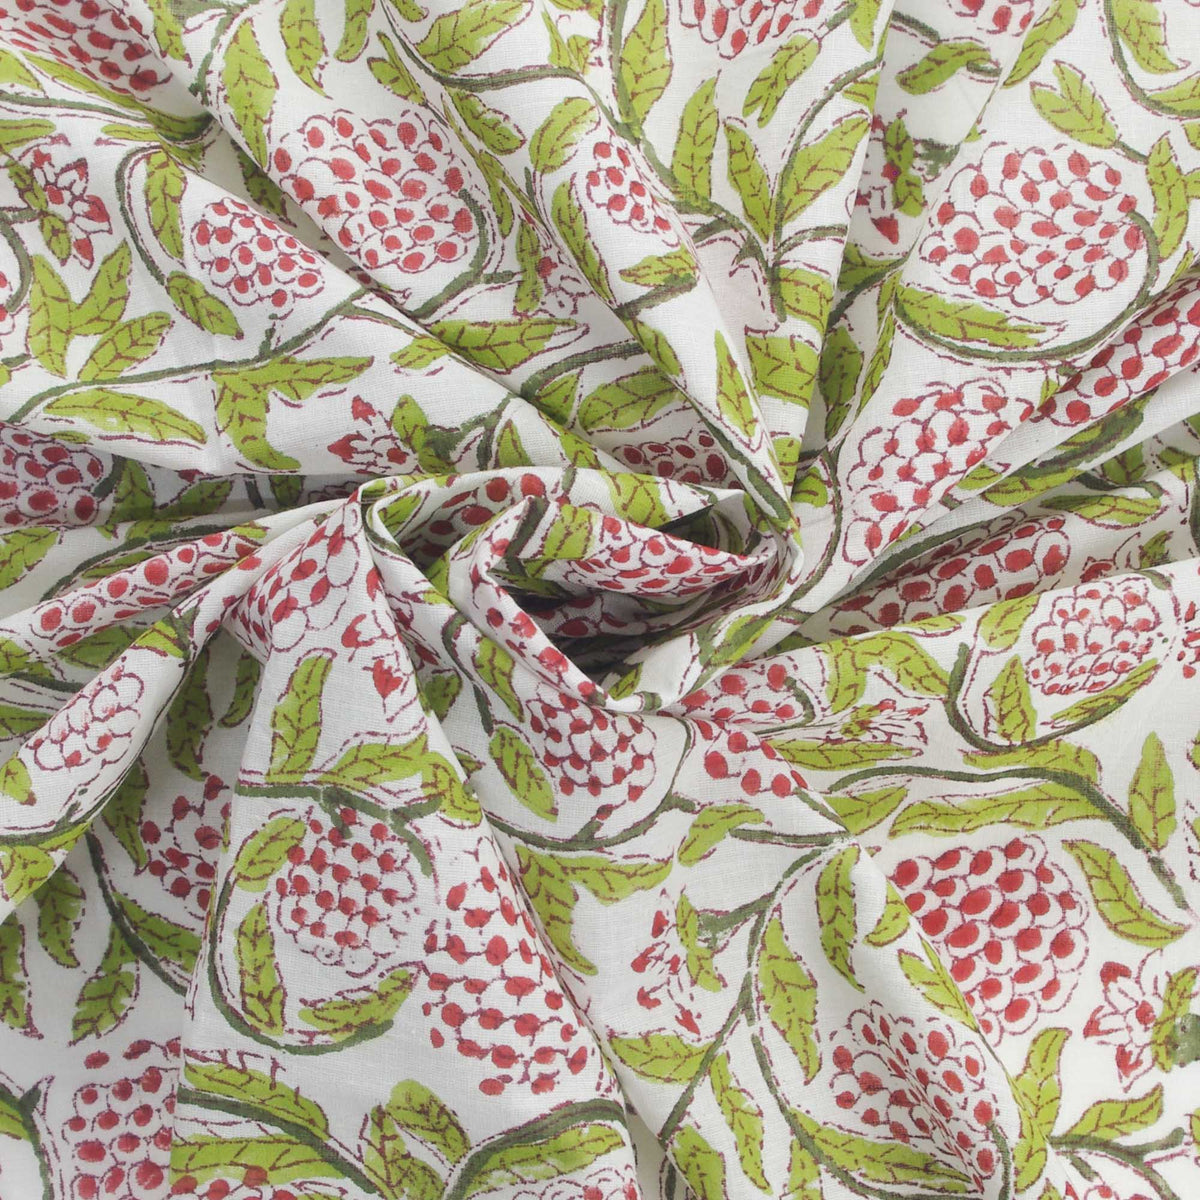 Indian fabric quilting Block Print Fabric Soft Cotton fabric